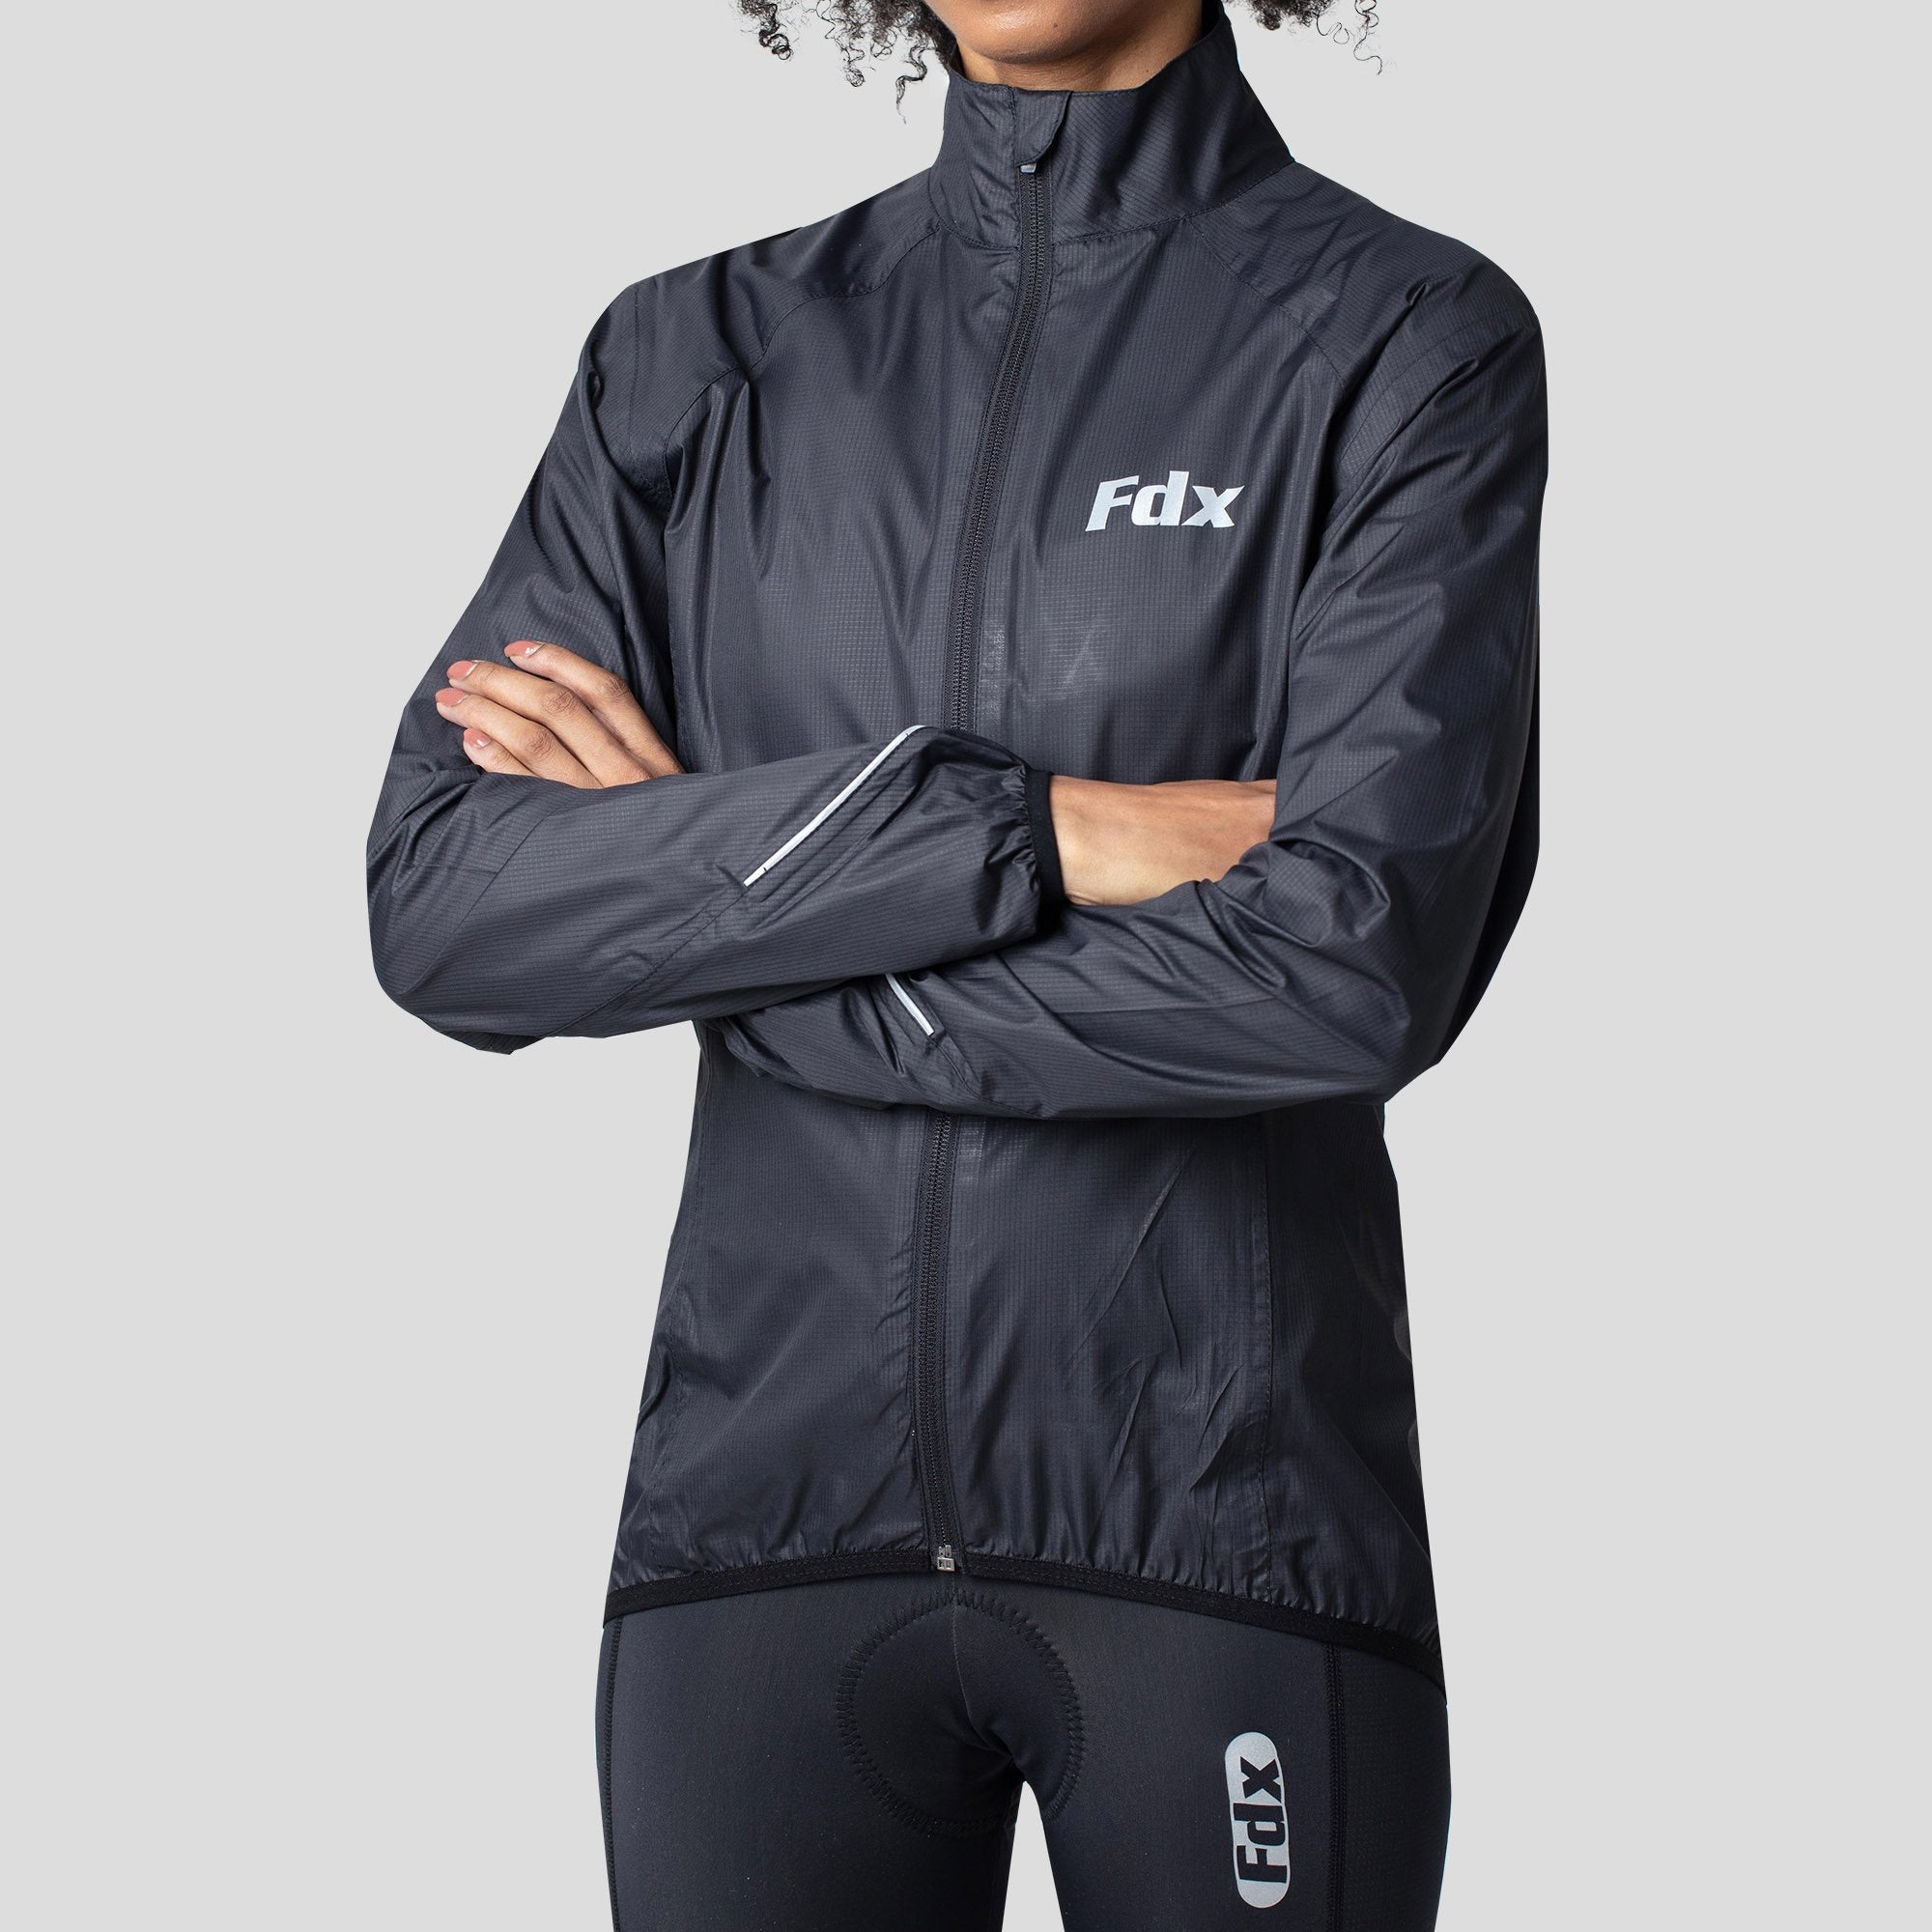 Women’s Black cycling jacket waterproof breathable quick dry MTB rain top, lightweight packable reflective rain jacket for riding running racing